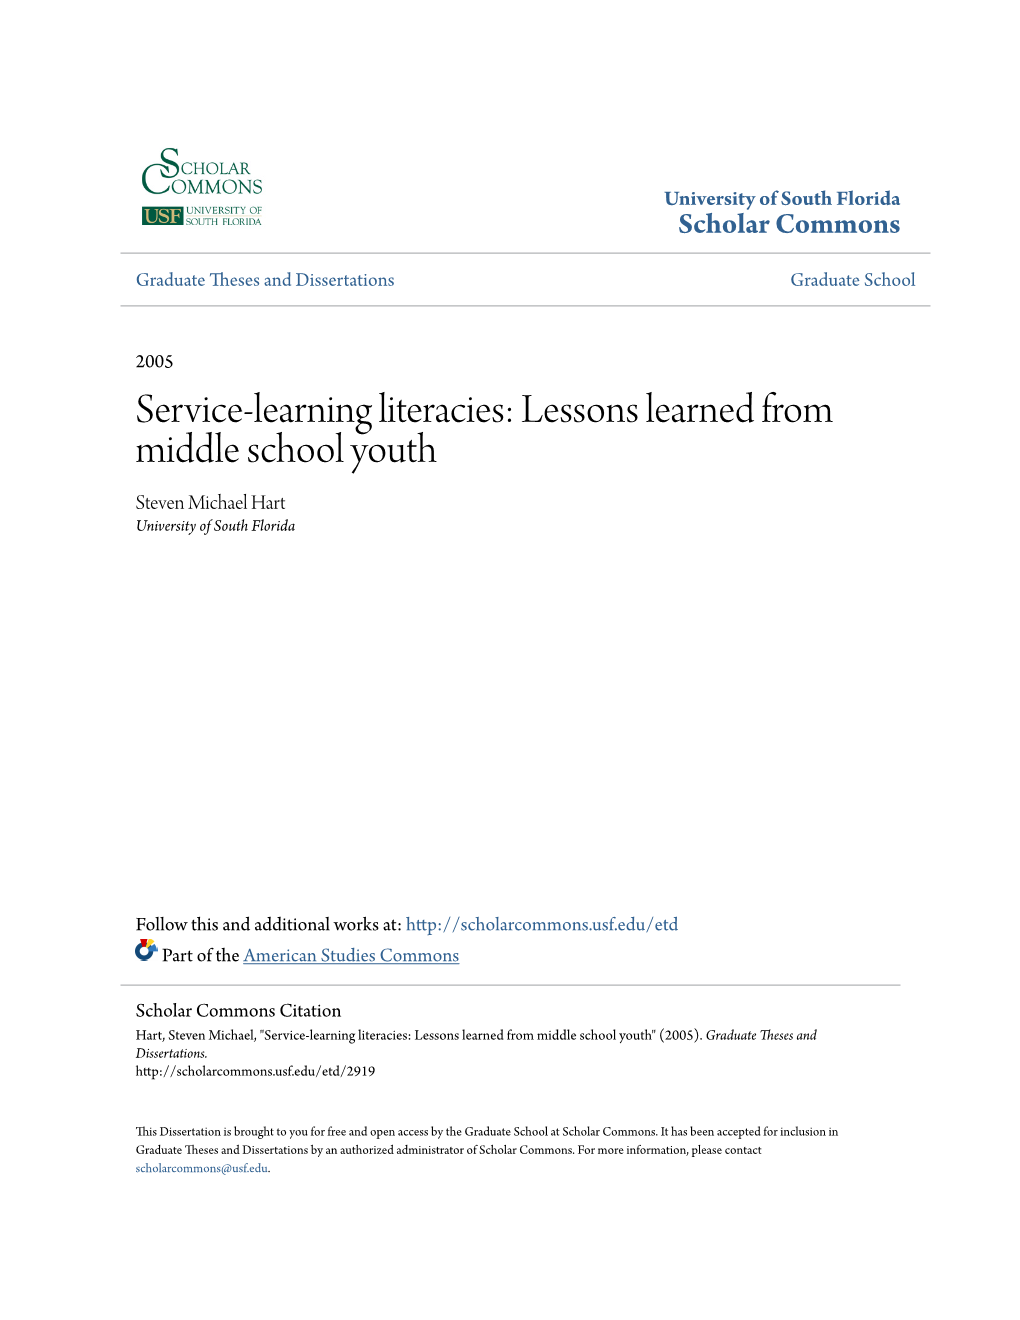 Service-Learning Literacies: Lessons Learned from Middle School Youth Steven Michael Hart University of South Florida